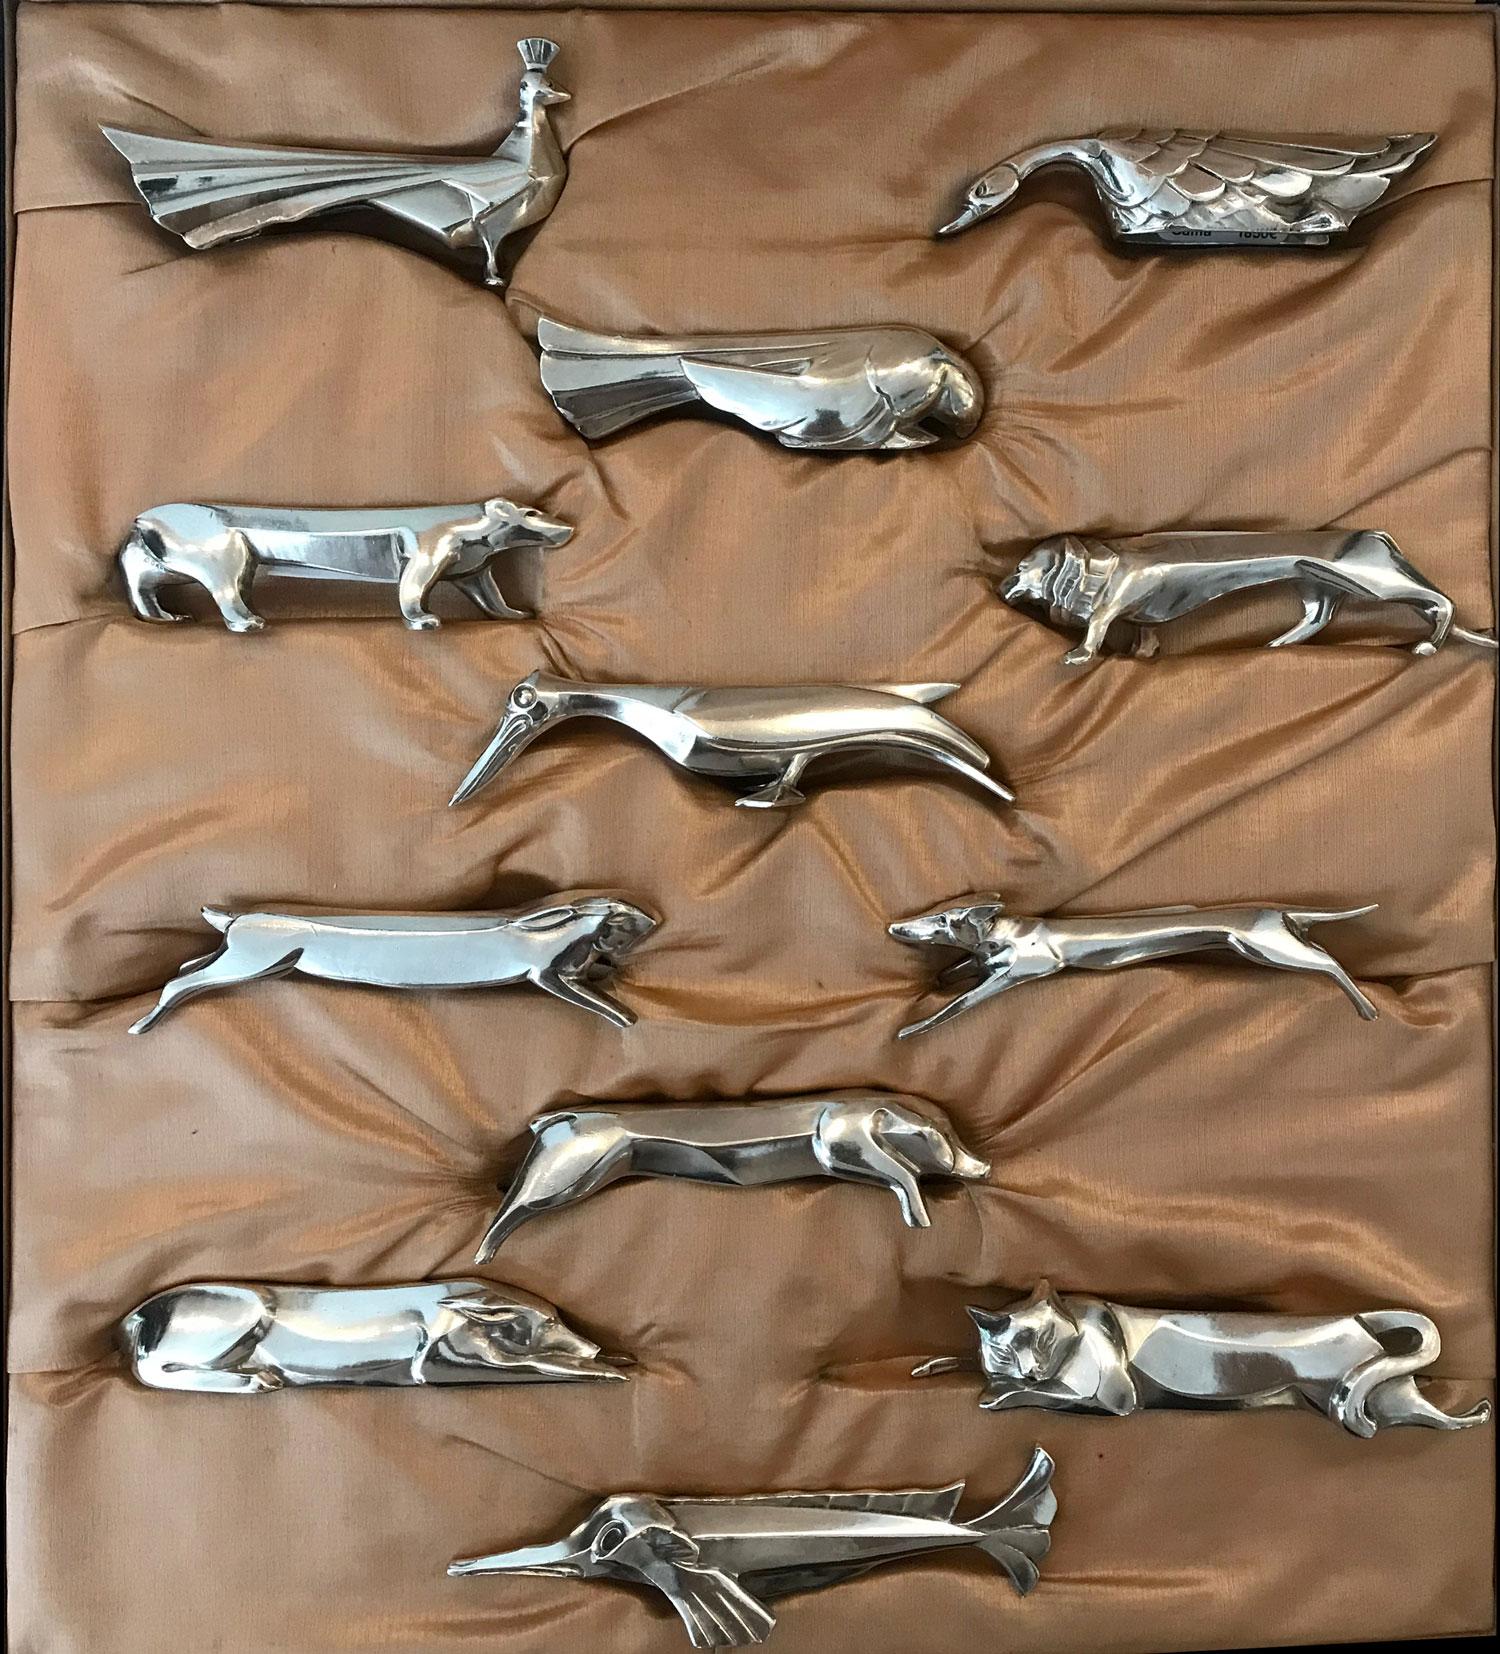 Set of 12 silver plated animal knife-rests after a model created by the animal sculptor Edouard Marcel Sandoz and realized by the silversmith Gallia, circa 1930.

Set composed of 12 different animals: 1 peacock, 1 swan, 1 dove, 1 bear, 1 lion,